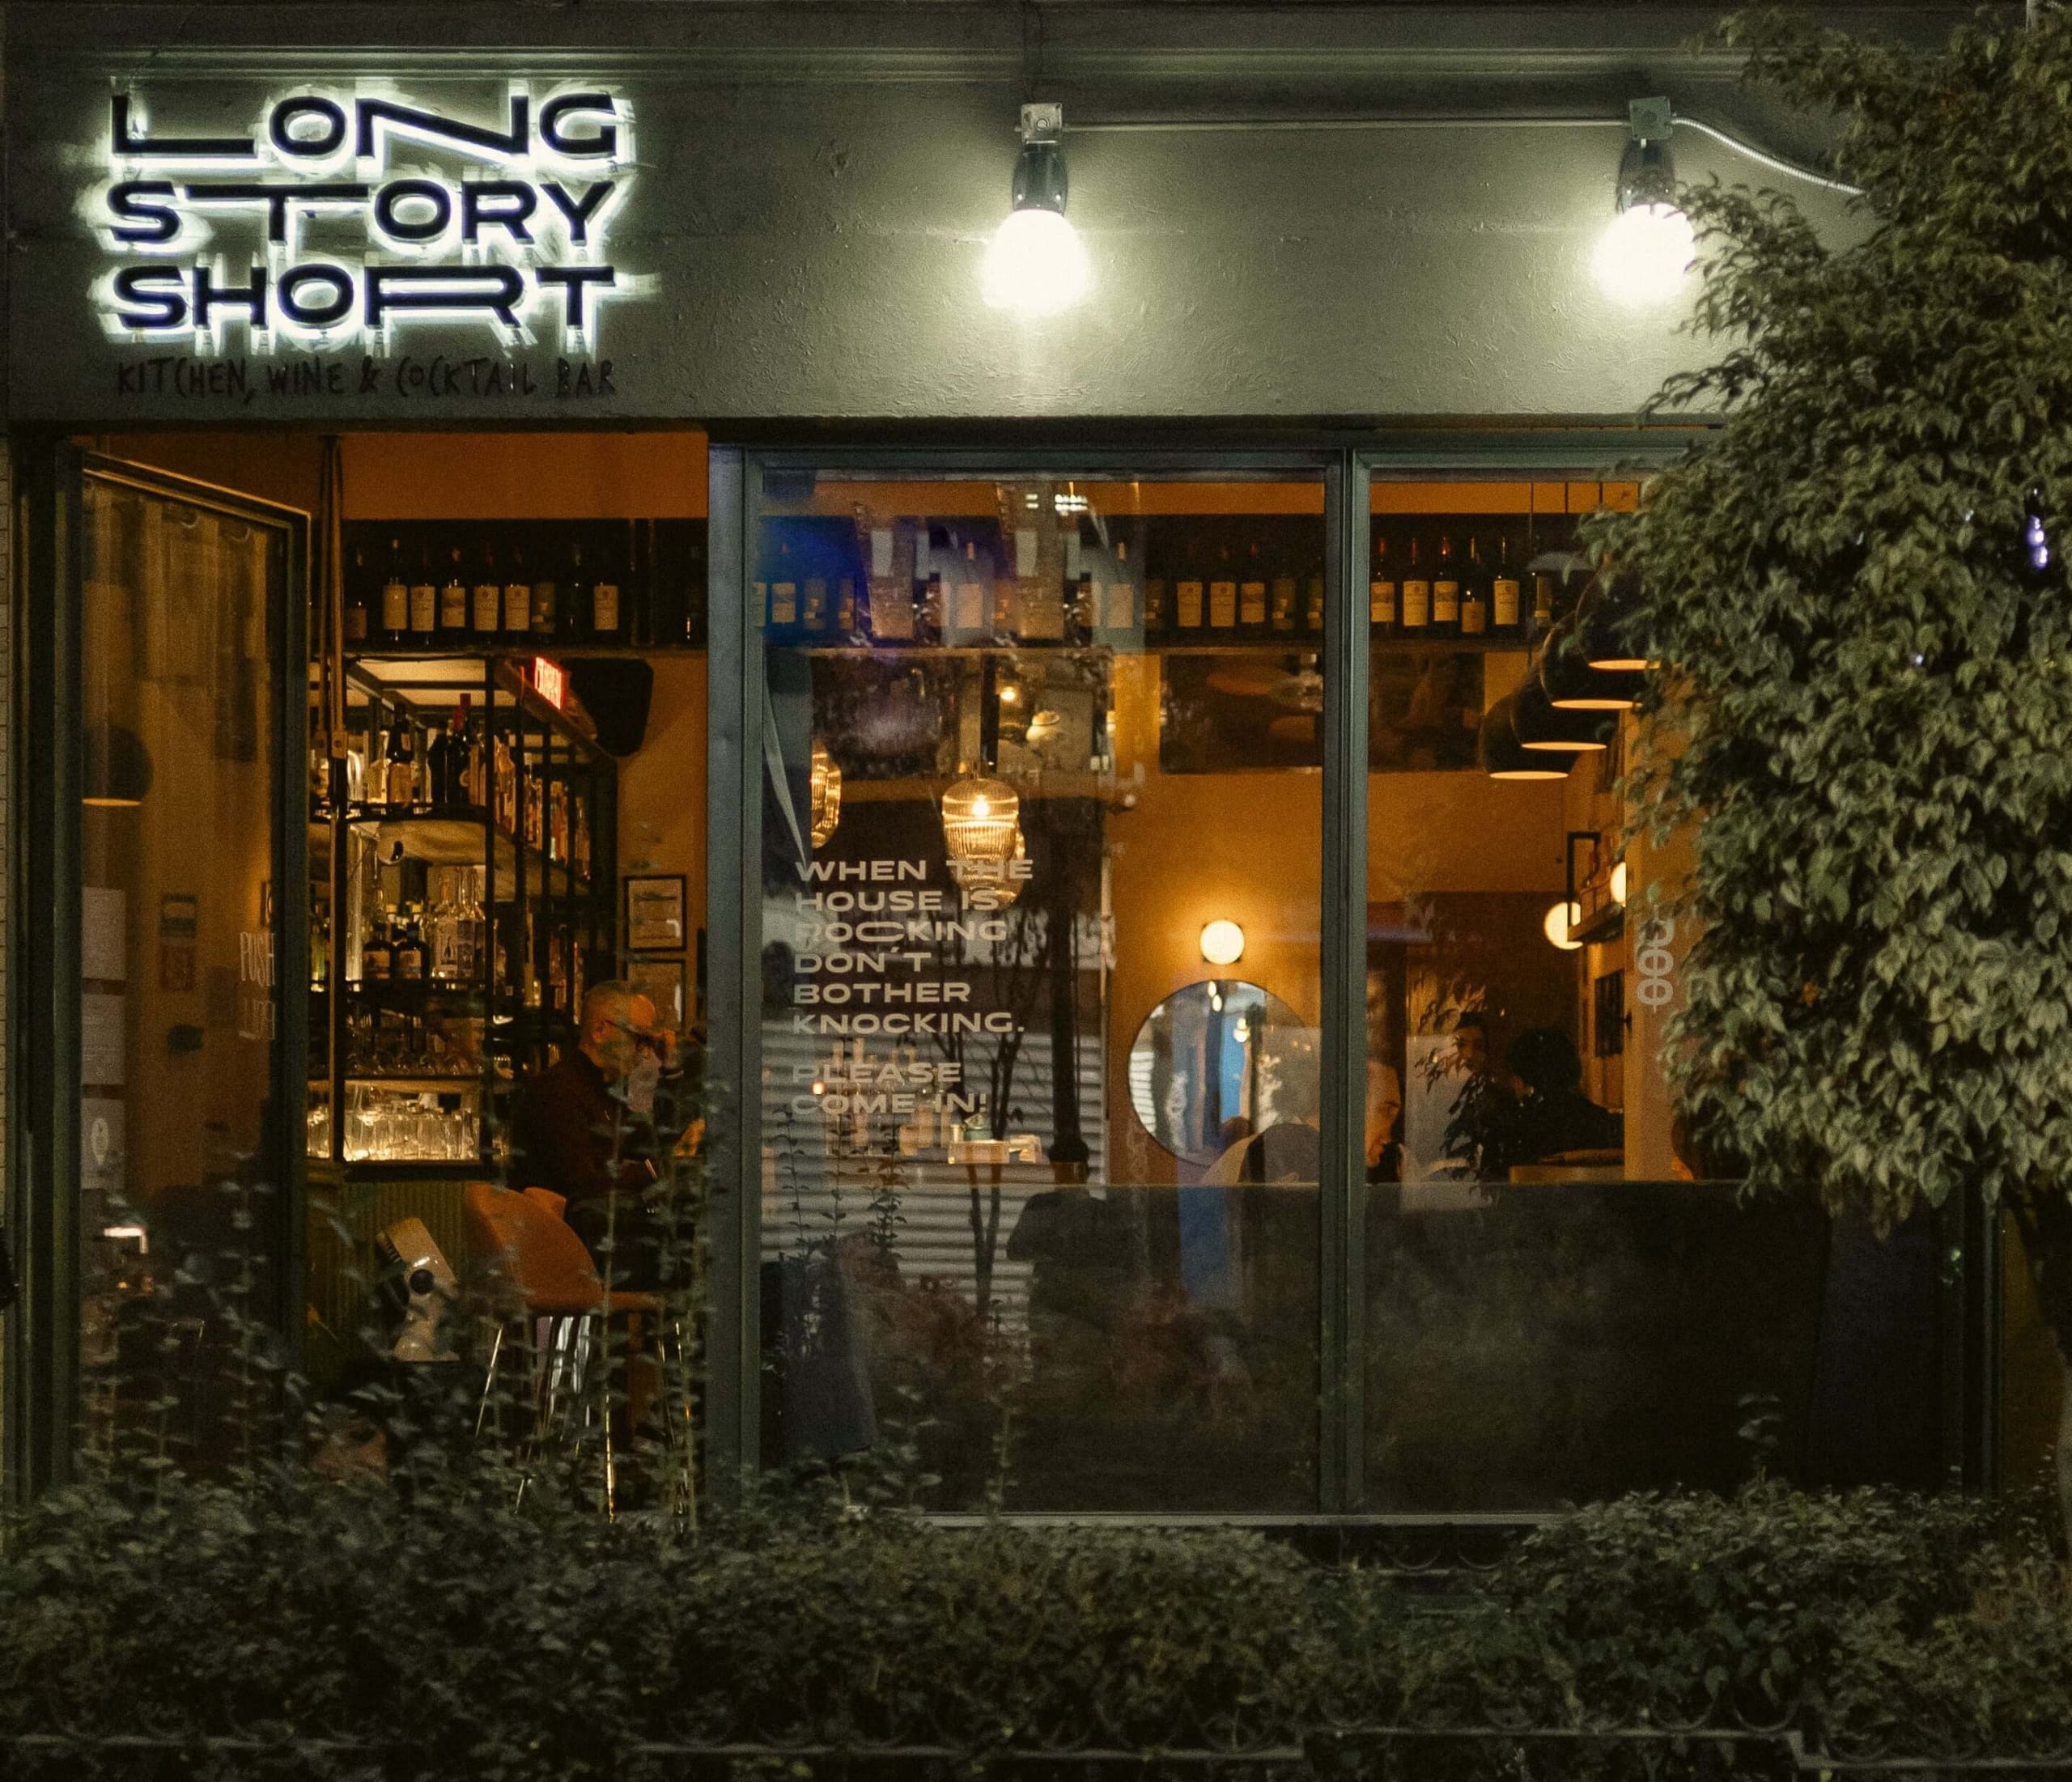 The best bars in Mexico City | The dimly-lit exterior of Long Story Short Bar